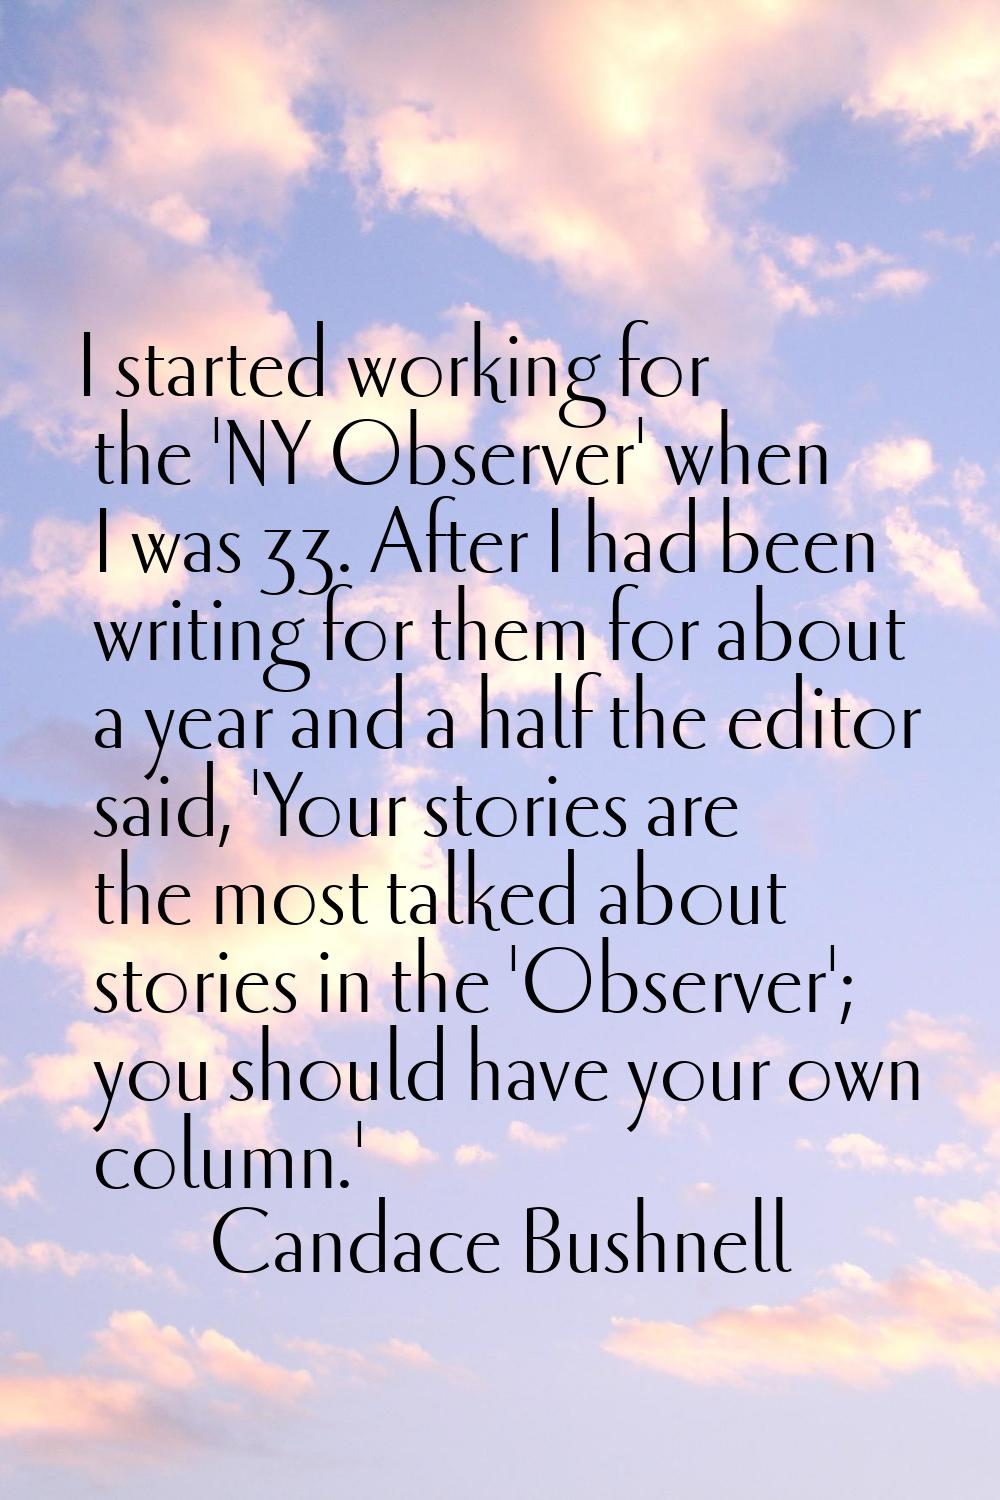 I started working for the 'NY Observer' when I was 33. After I had been writing for them for about 